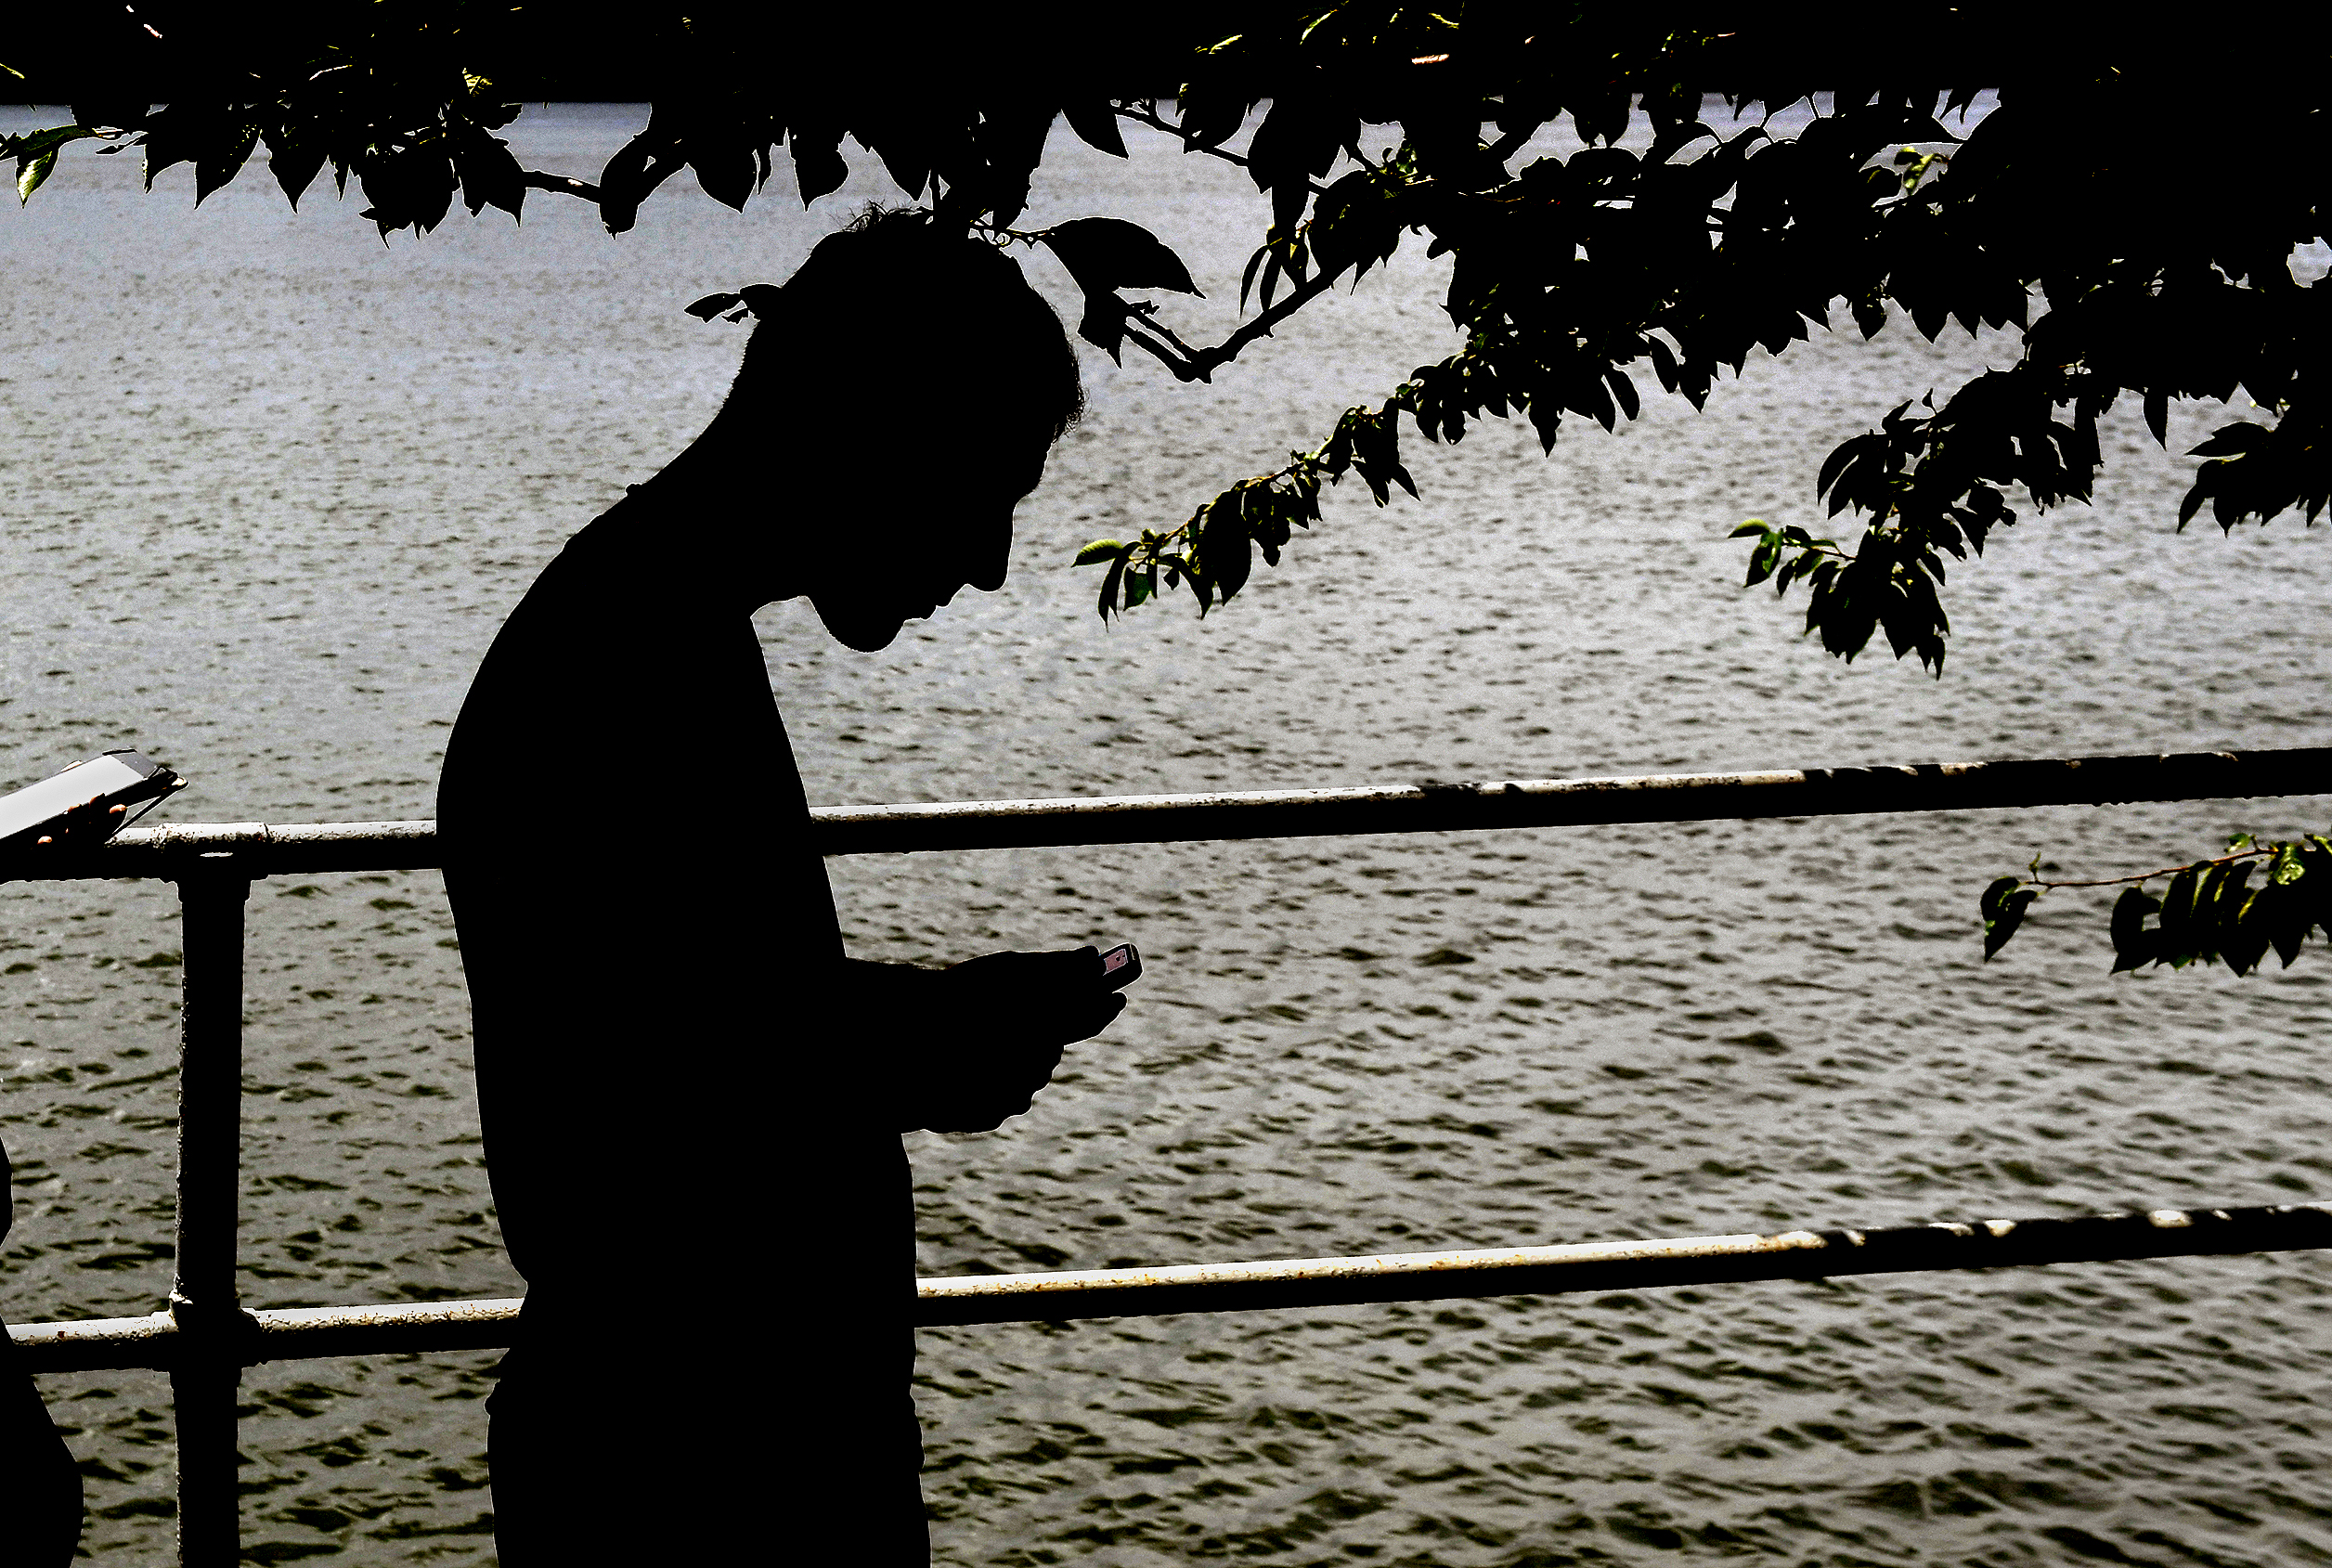 A Pokemon Go participant checks for Pokemon's as he paused along the Tidal Basin, in Washington, on July 30, 2016. (Michael S. Williamson&mdash;The Washington Post/Getty Images)